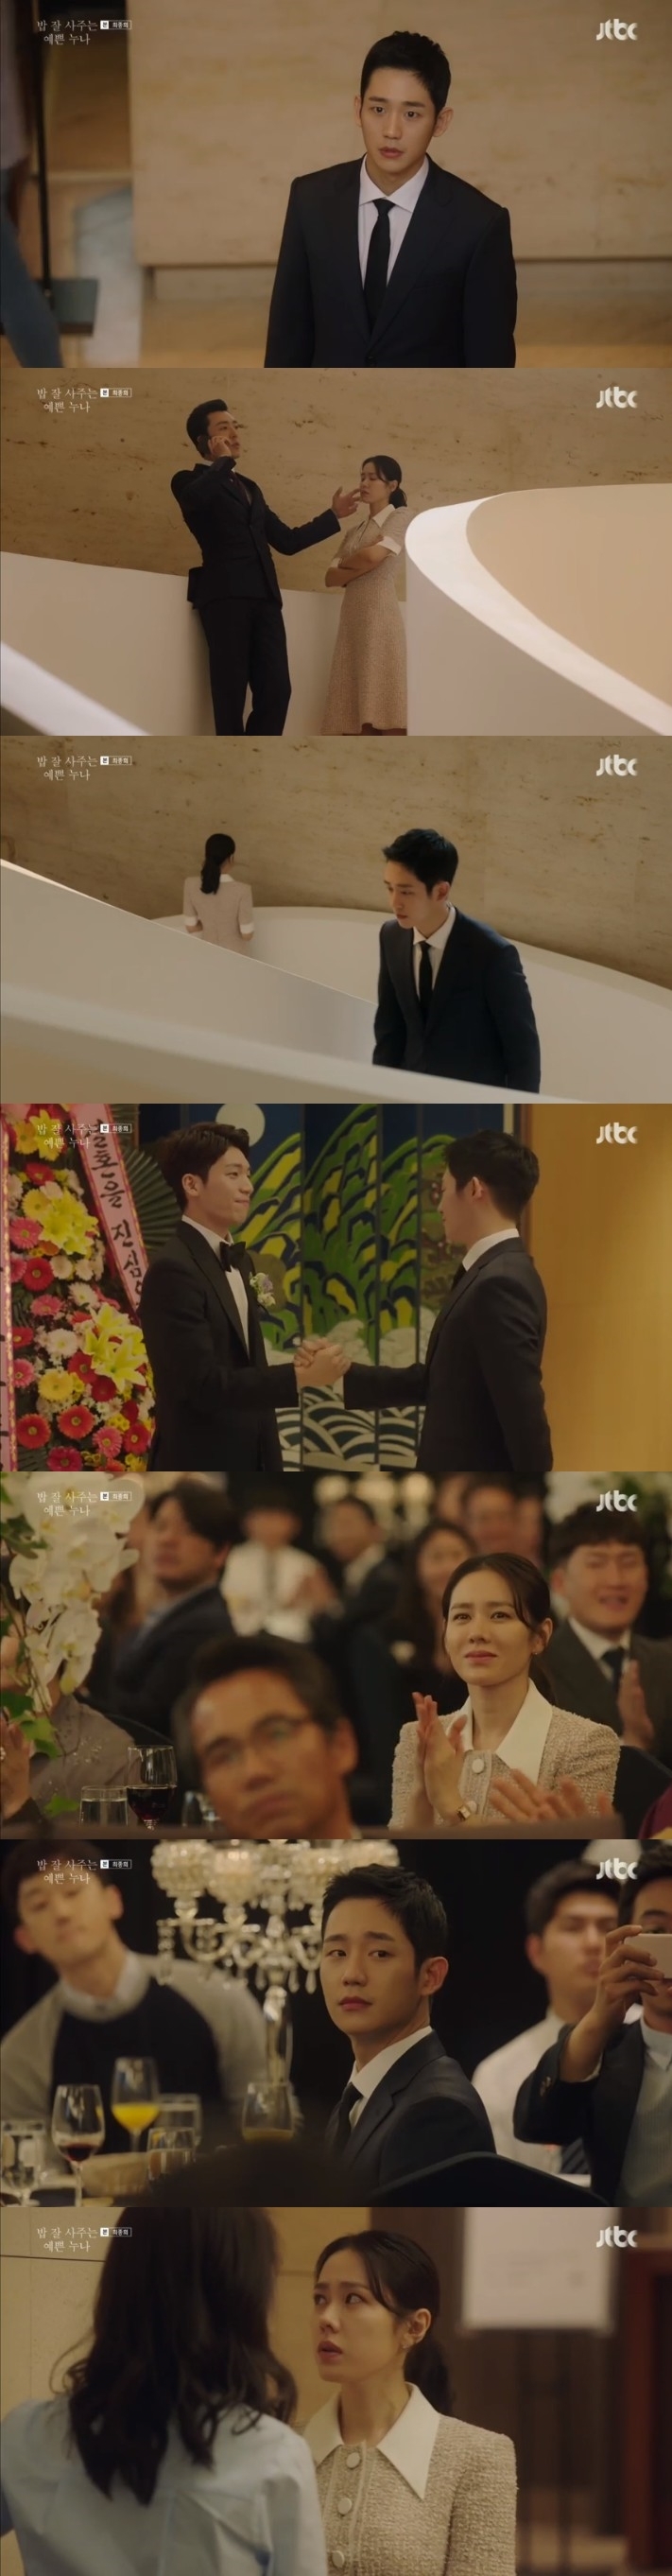 Seoul = = Bob-buying pretty sister Son Ye-jin and Jung Hae In pretended not to know each other.JTBCs gilt drama A Pretty Sister Who Buys Bob Good (playplayed by Kim Eun/director Ahn Pan-seok) was broadcast at 11 p.m. on the 19th, and the images of Yoon Jin-ah (Son Ye-jin) and Seo Jun-hee (Jung Hae In) were drawn, which were reunited accidentally at the marriage ceremony of Yoon Seung-ho (Whiha Jun).On this day, Seo Jun-hee witnessed the appearance of Yoon Jin-ah, who had a new boyfriend.Yoon Jin-ahs boyfriend said he had to go because he had a job and Yoon Jin-ah was sad to his boyfriend.Afterwards, Yoon Jin-ah turned away when he saw Seo Jun-hee looking at himself.Seo Jun-hee approached Yoon Seung-ho and greeted him, and Yoon Seung-ho was surprised to say, How did you come? So Seo Jun-hee said, Do you need to hear and know the marriage? Congratulations.I envy you, he said, and also said to Yoon Sang-ki (Oman Seok) and Kim Mi-yeon (Gil Hae-yeon).Since then, Yoon Jin-ah and Seo Jun-hee have been conscious of each other, but they did not pretend to know.I do not know what my face is now, said Geum Bo-ra, a co-worker. My lover who thought she was dead came back to life and was crazy.Its not Yoon Jin-ah, what are you going to do? he worried.Yoon Jin-ah showed tears in front of Geum Bo-raThen he argued again on the phone with his boyfriend, and looked at the back of Seo Jun-hee passing behind him.Seeing him leave in a taxi, Soon Jin-ah looked mixed up.